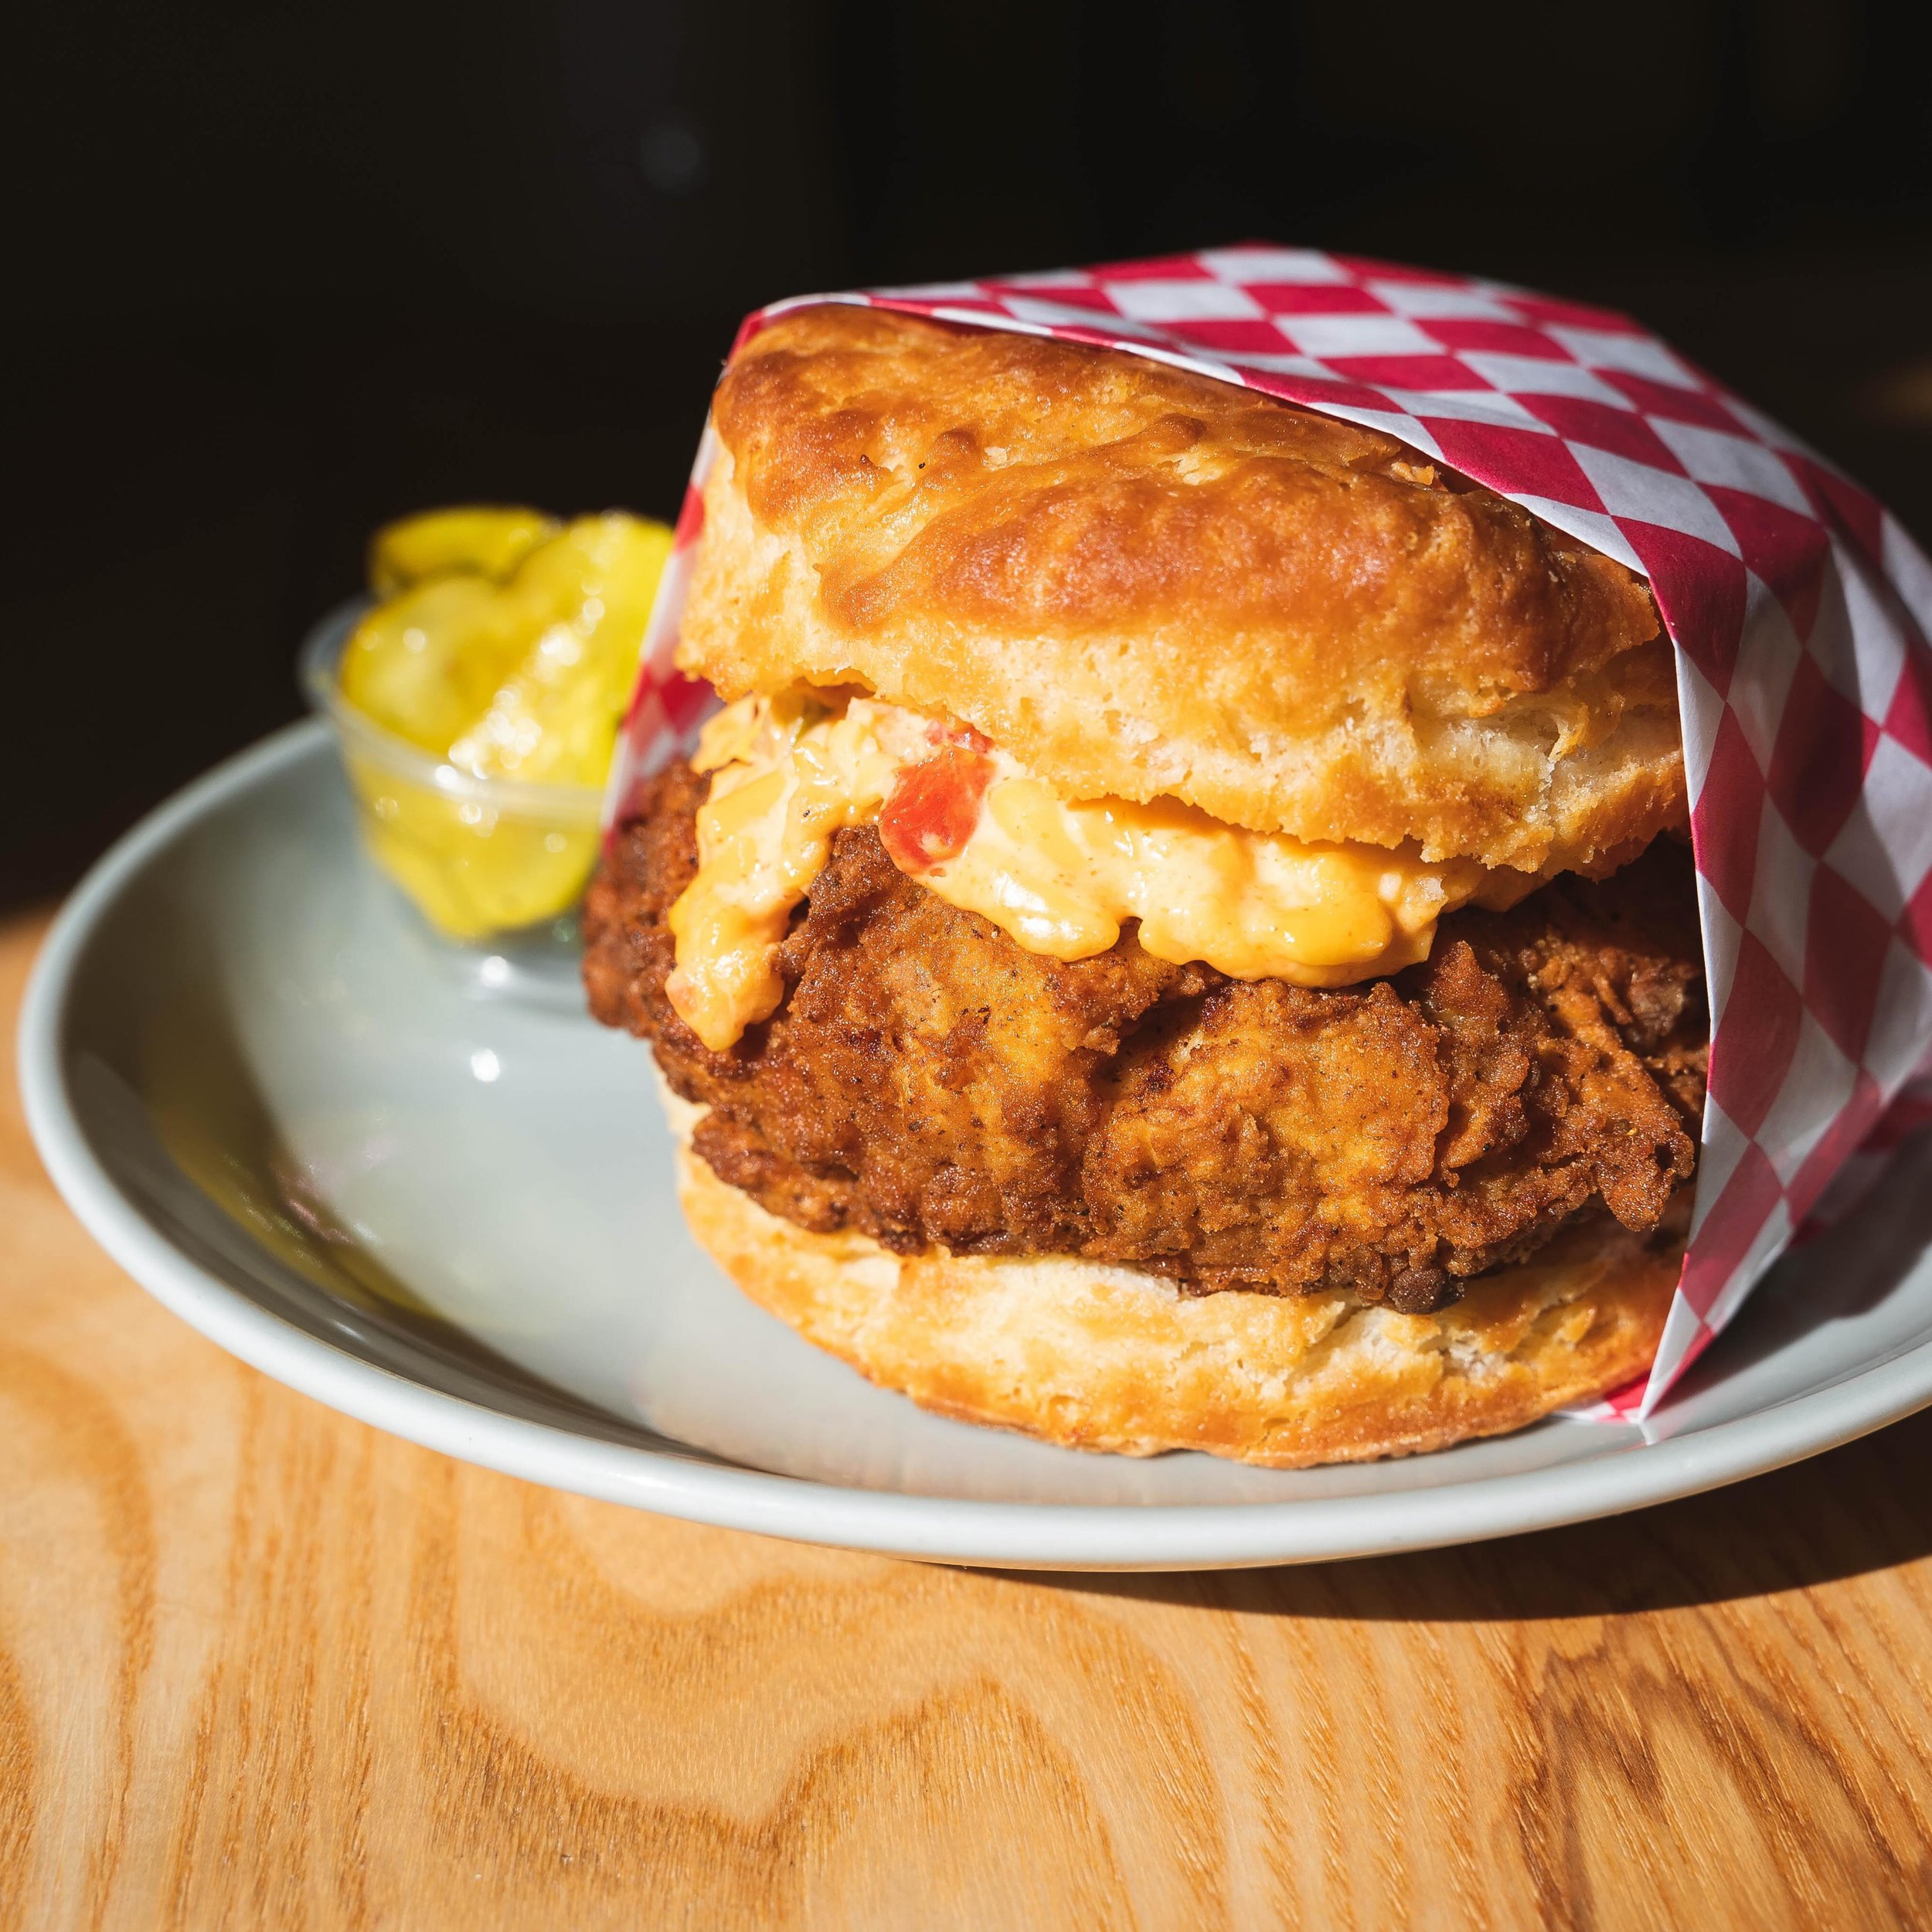 I couldn&rsquo;t stop thinking about this big chicken biscuit while I was working at @hereslookingatyoula last night 🥺 def adding pimento cheese and a side of orange tigre hot sauce &hellip;

WE&rsquo;RE OPEN MON + TUE, come recover/rejuvenate with 